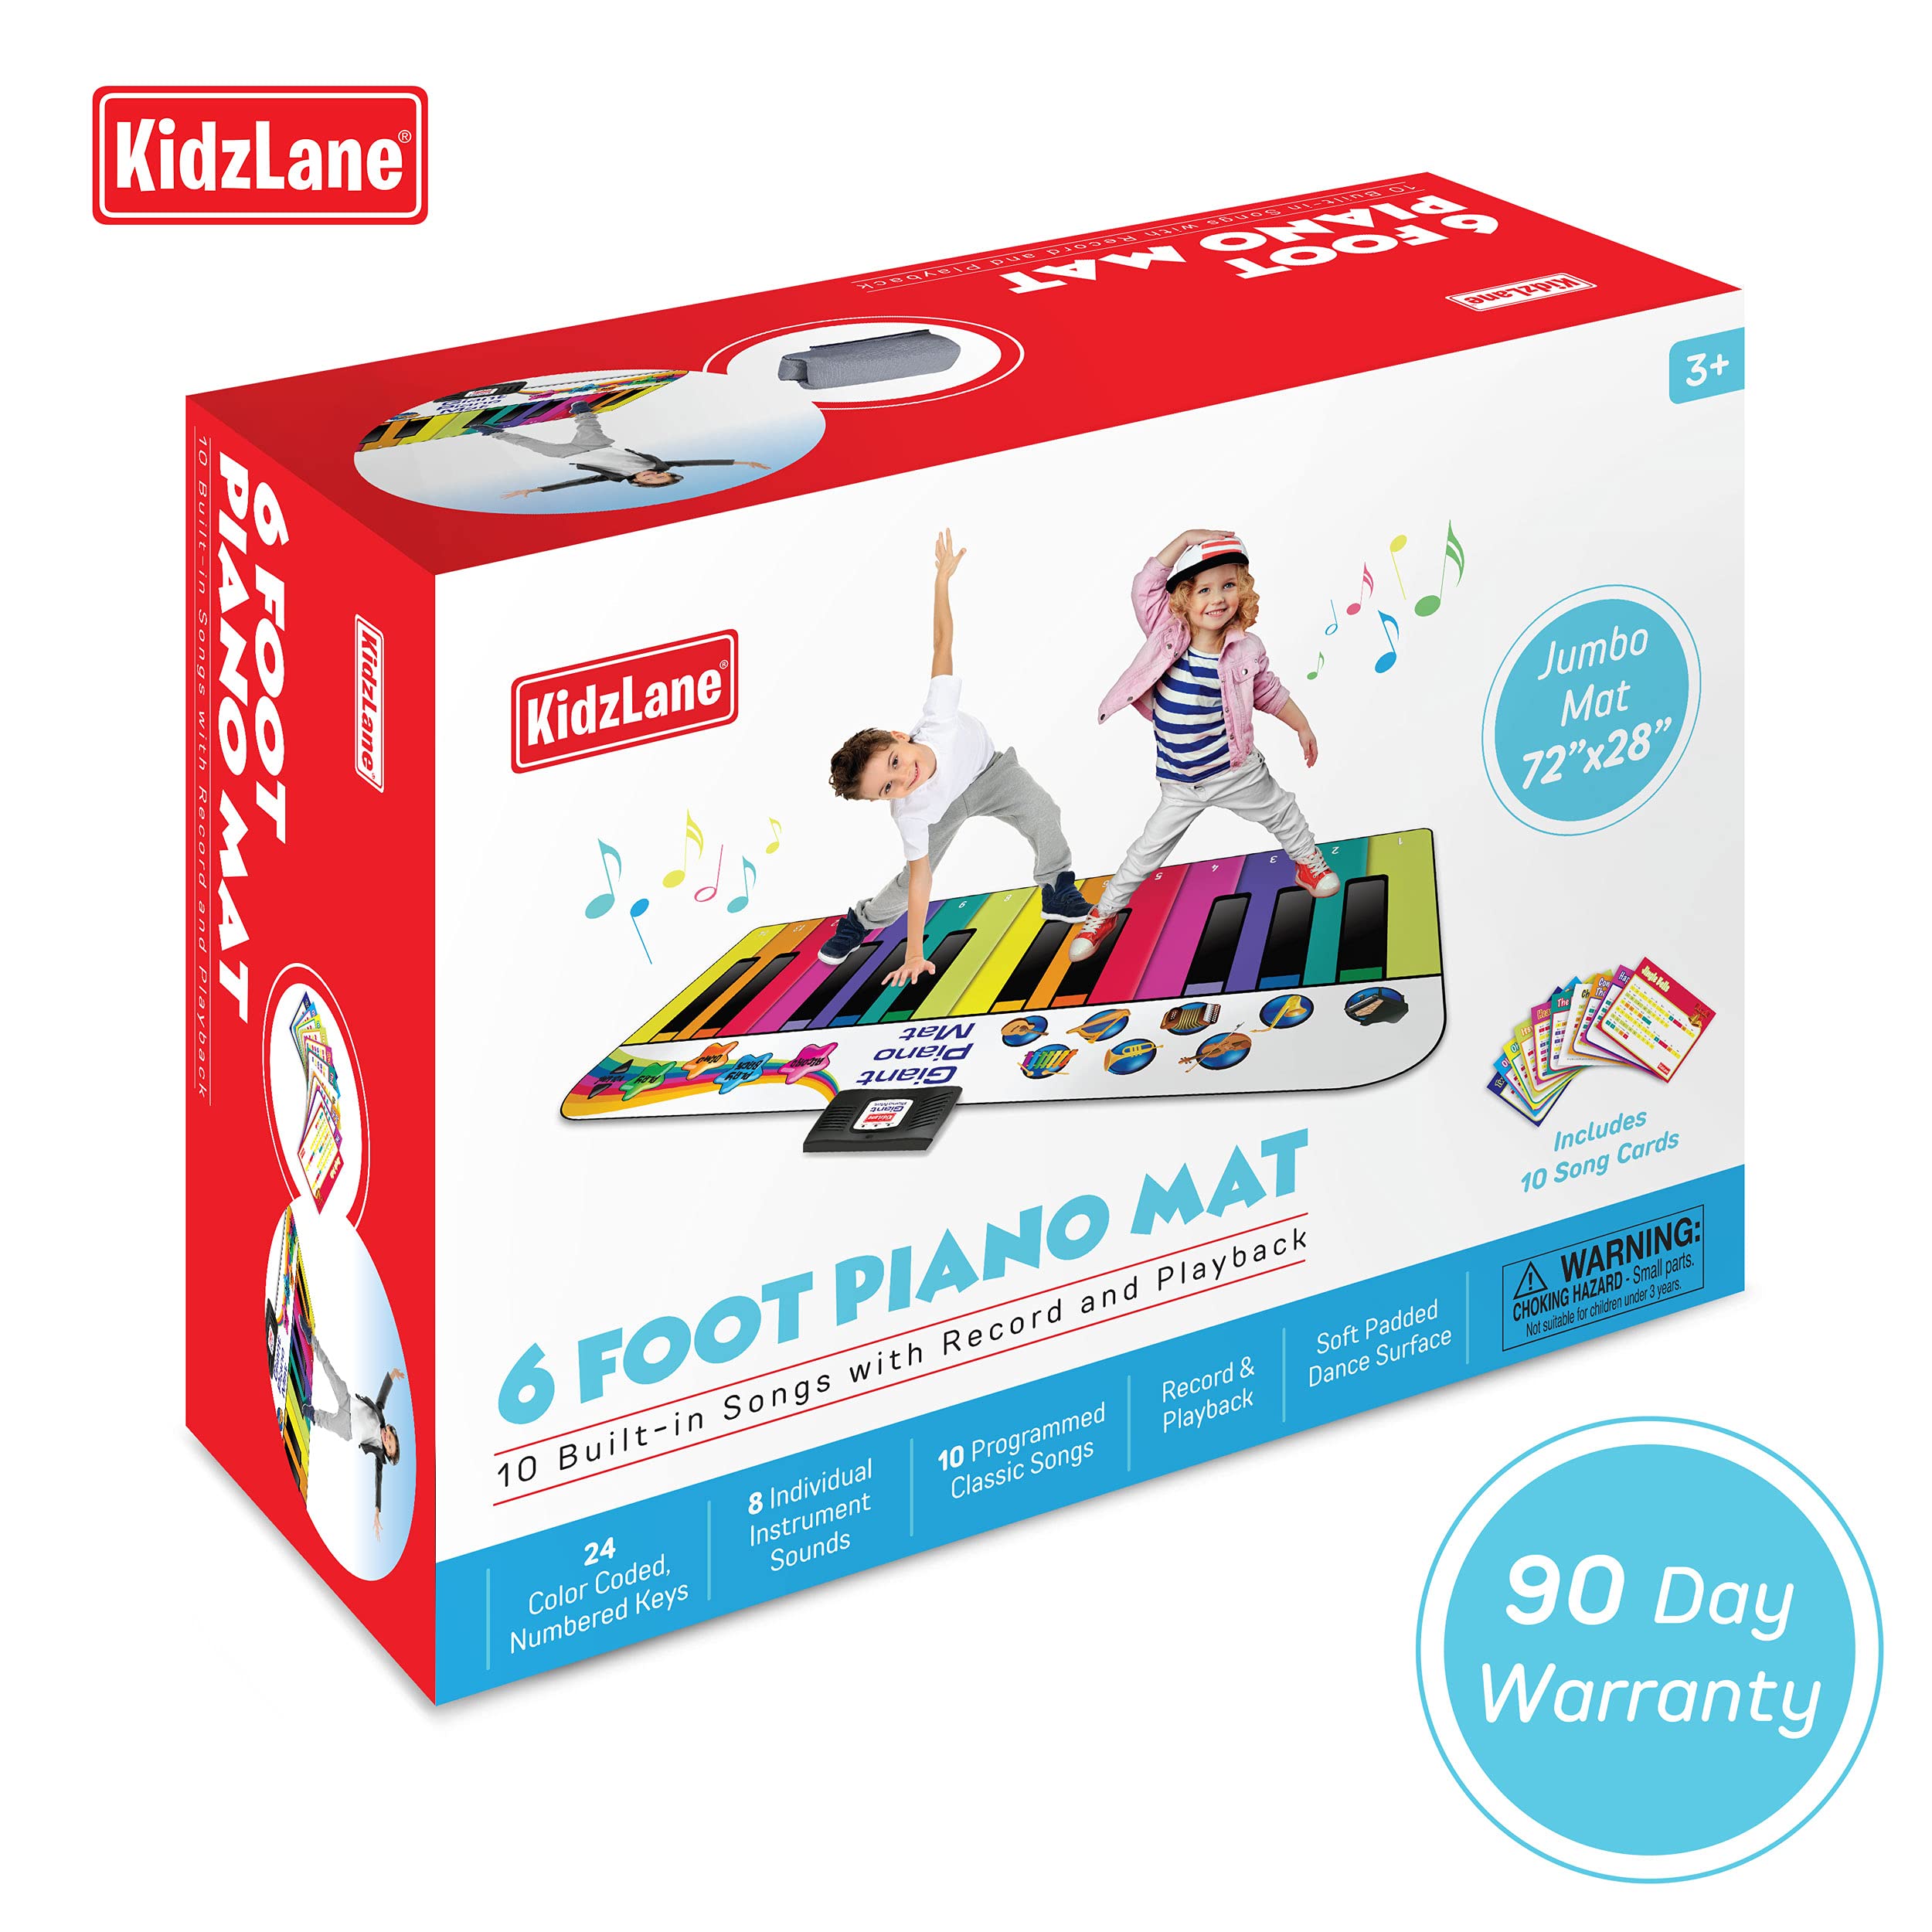 Kidzlane Floor Piano Mat for Kids and Toddlers | Giant 6 ft. Piano Mat, 24 Keys, 10 Song Cards, Built in Songs, Record & Playback, 8 Instrument Sounds | Dance Mat Toy for Boys & Girls Ages 3 Plus